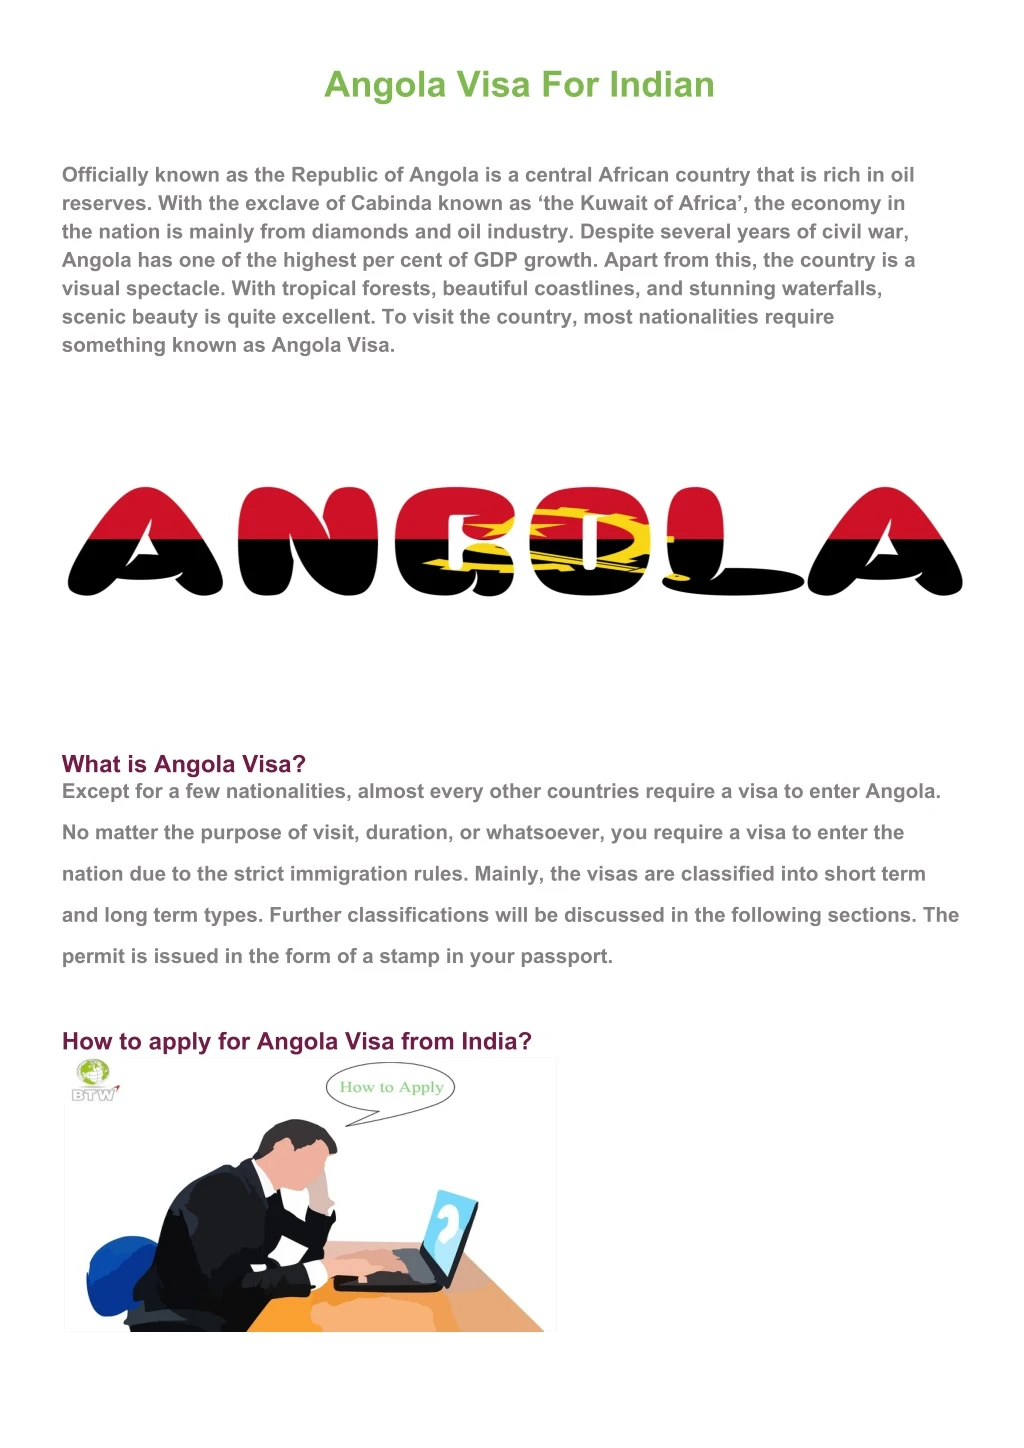 angola visa for indian officially known